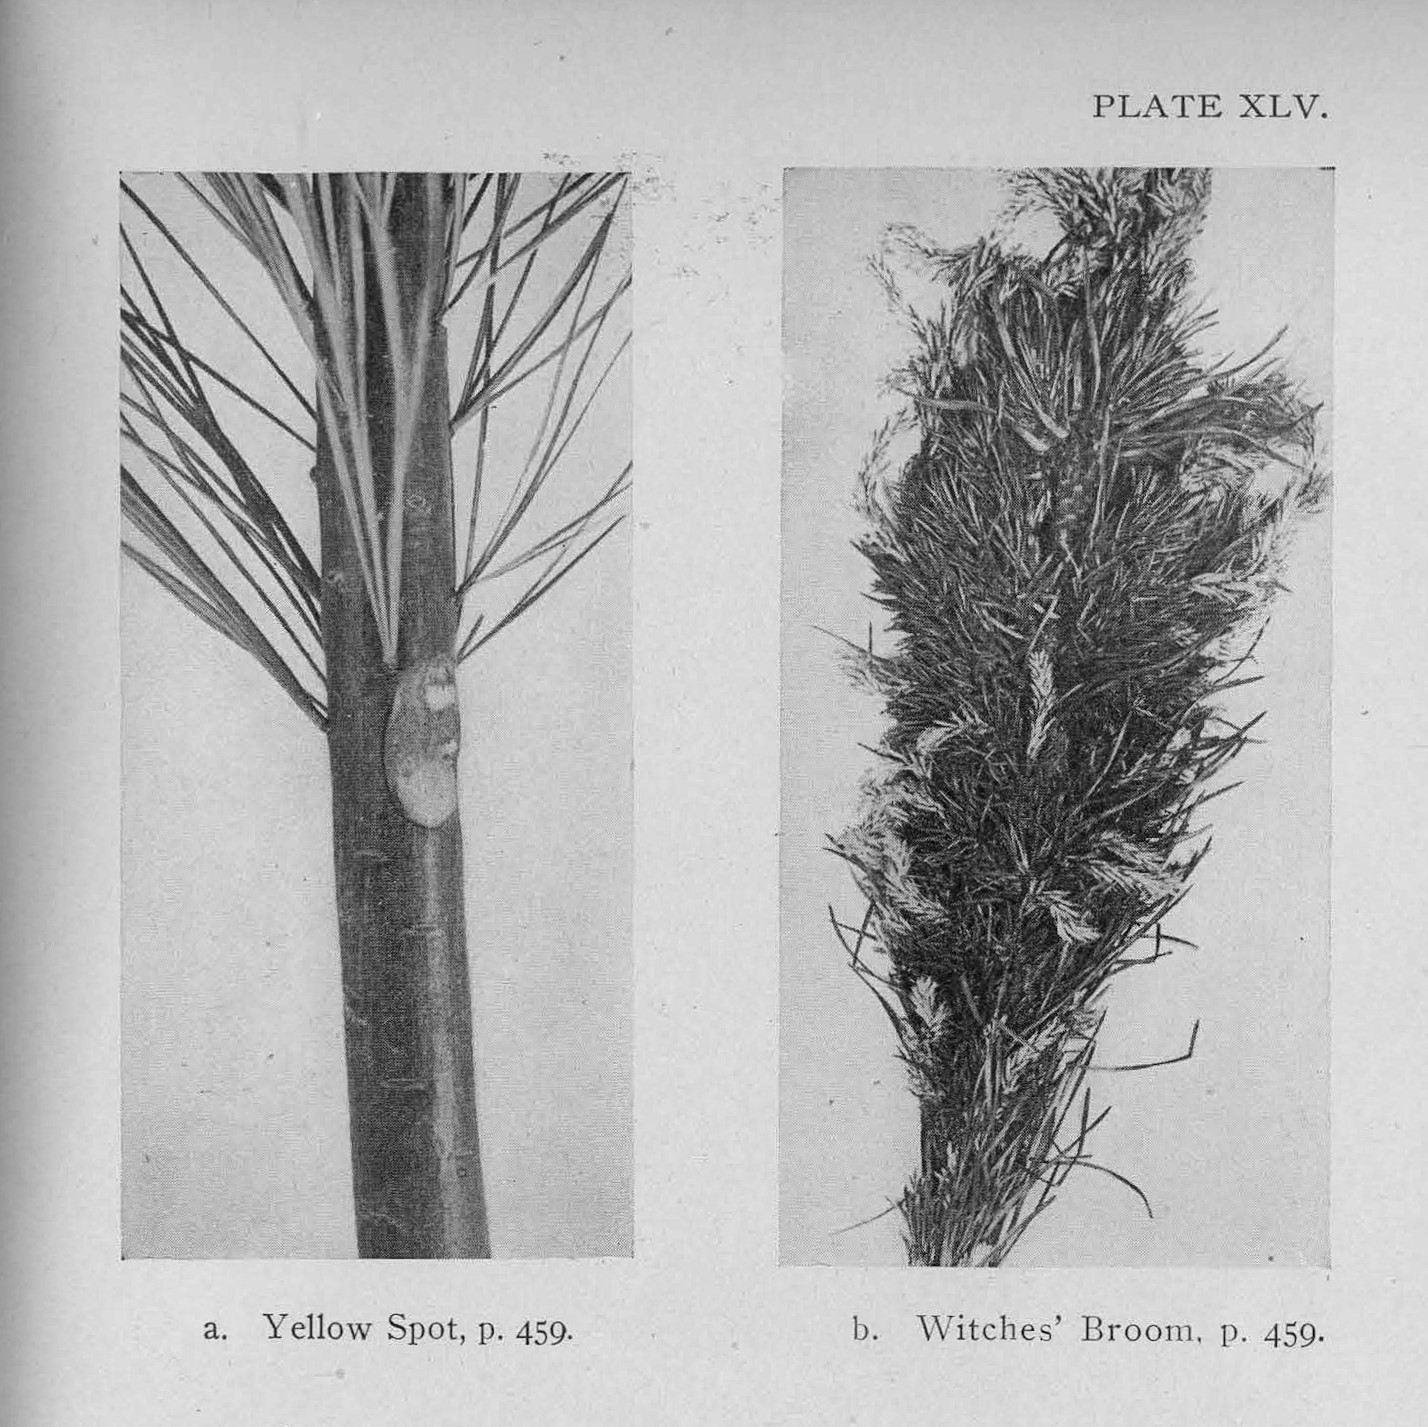 A witches' broom in a pine tree from the year 1919